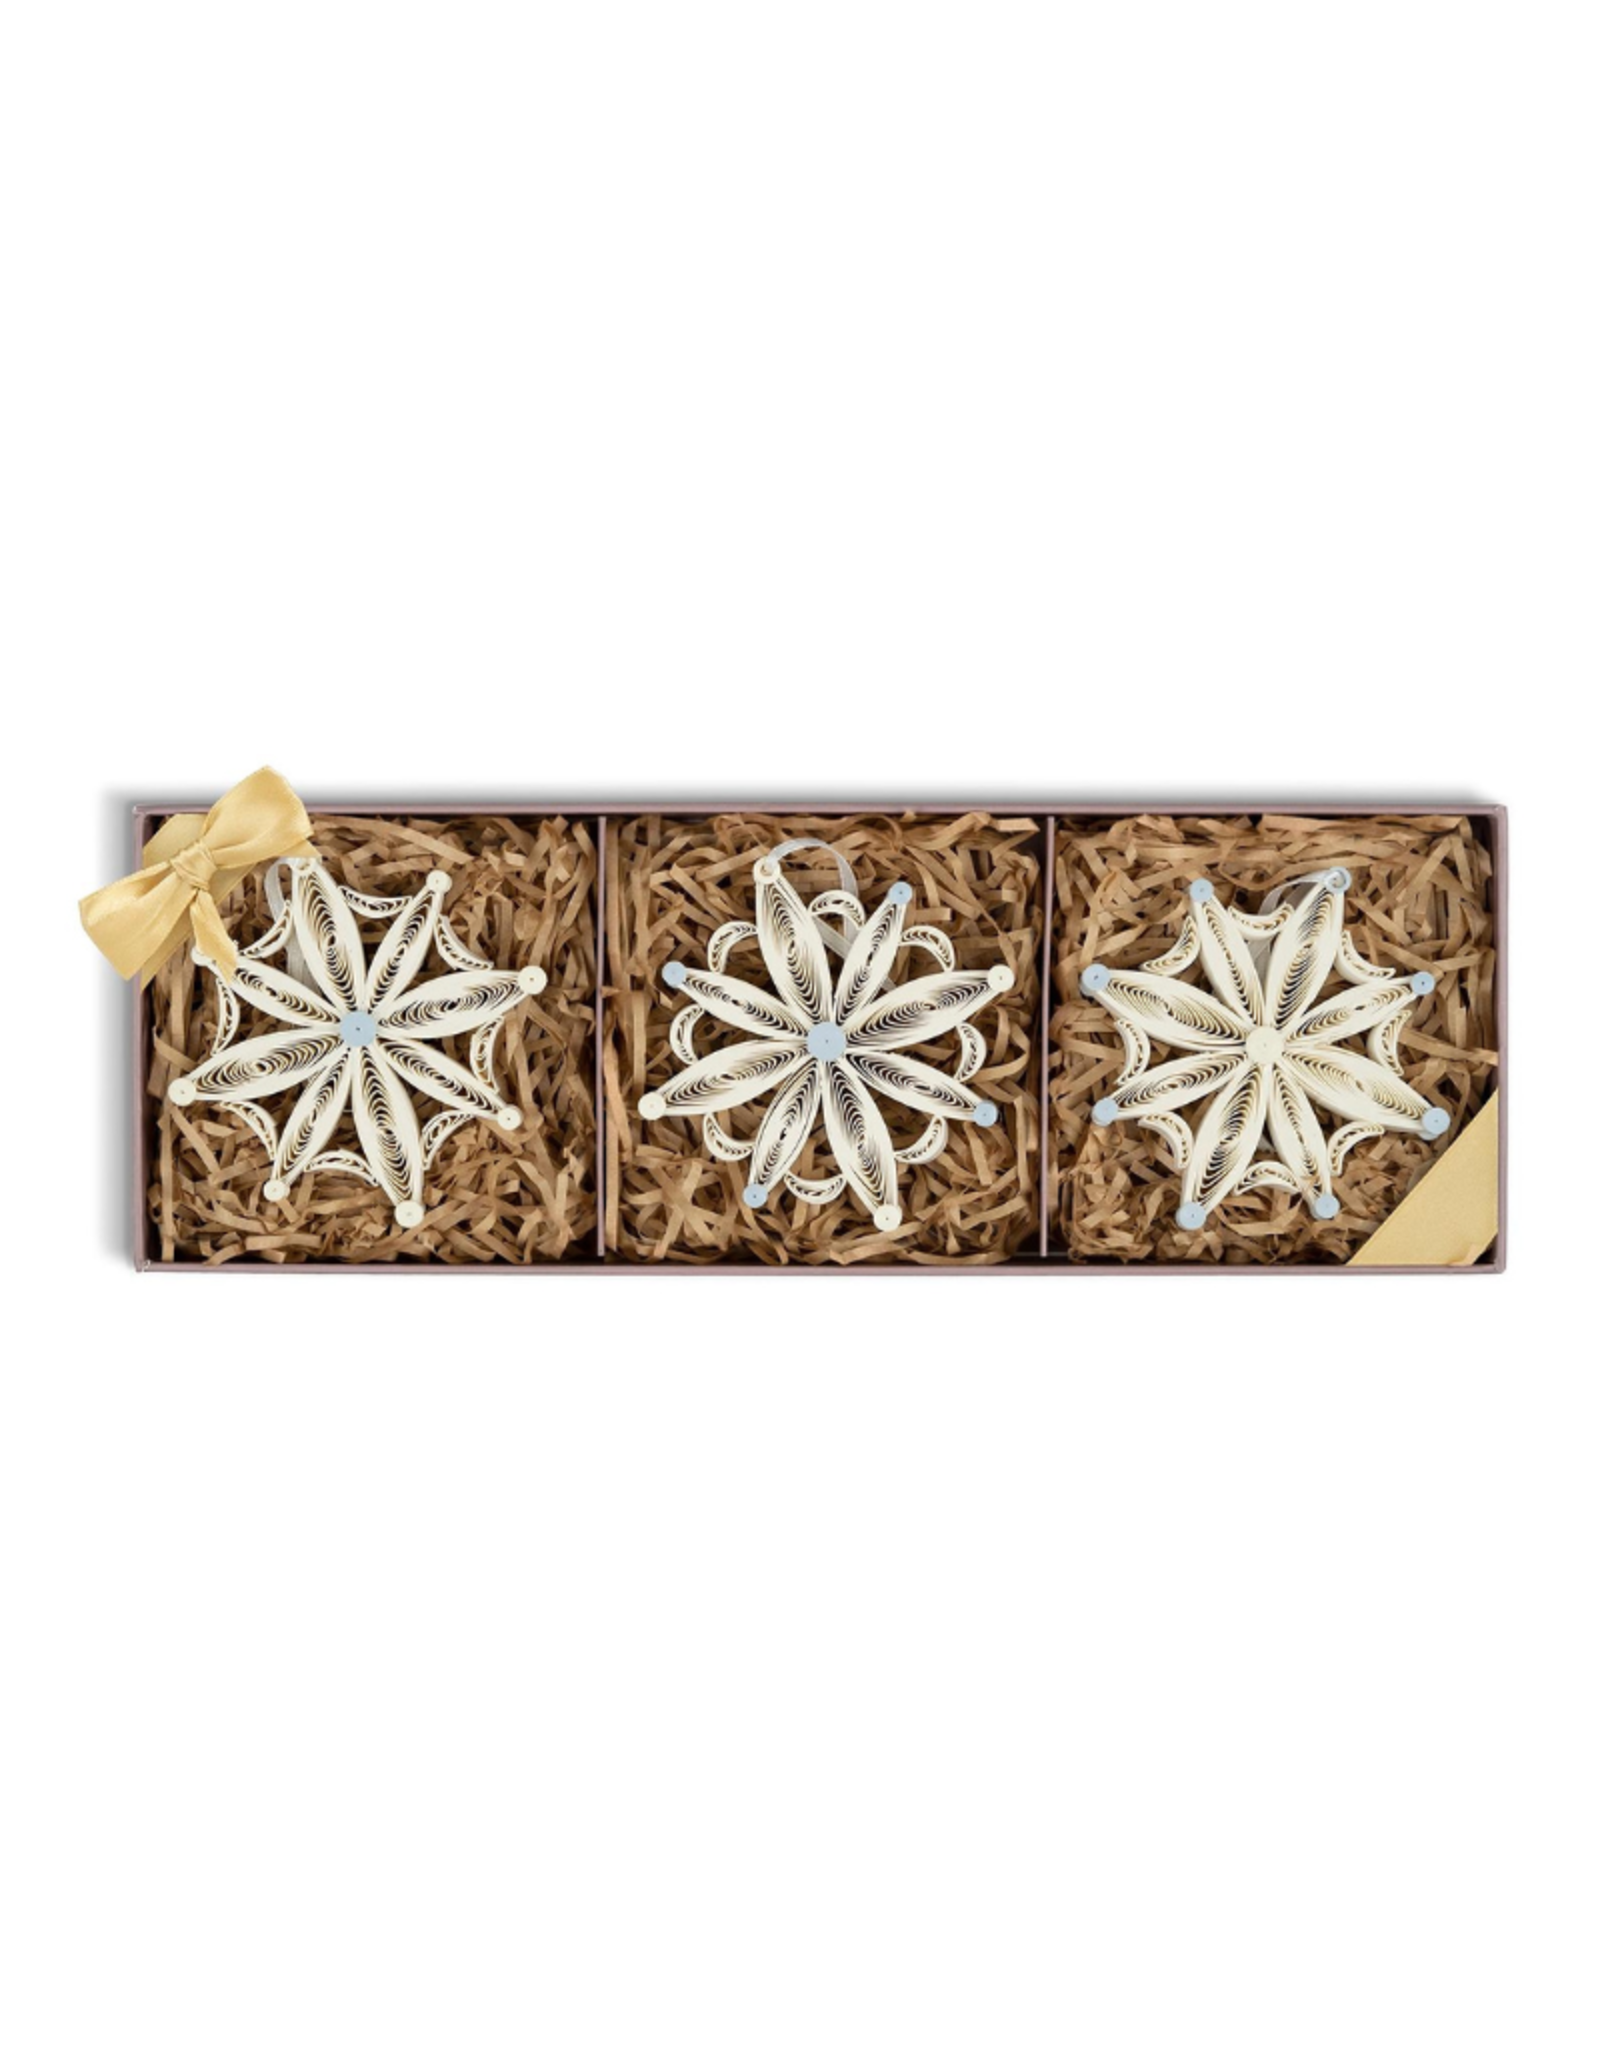 Quilling Card Quilled Snowflake Ornaments (Set of 3)